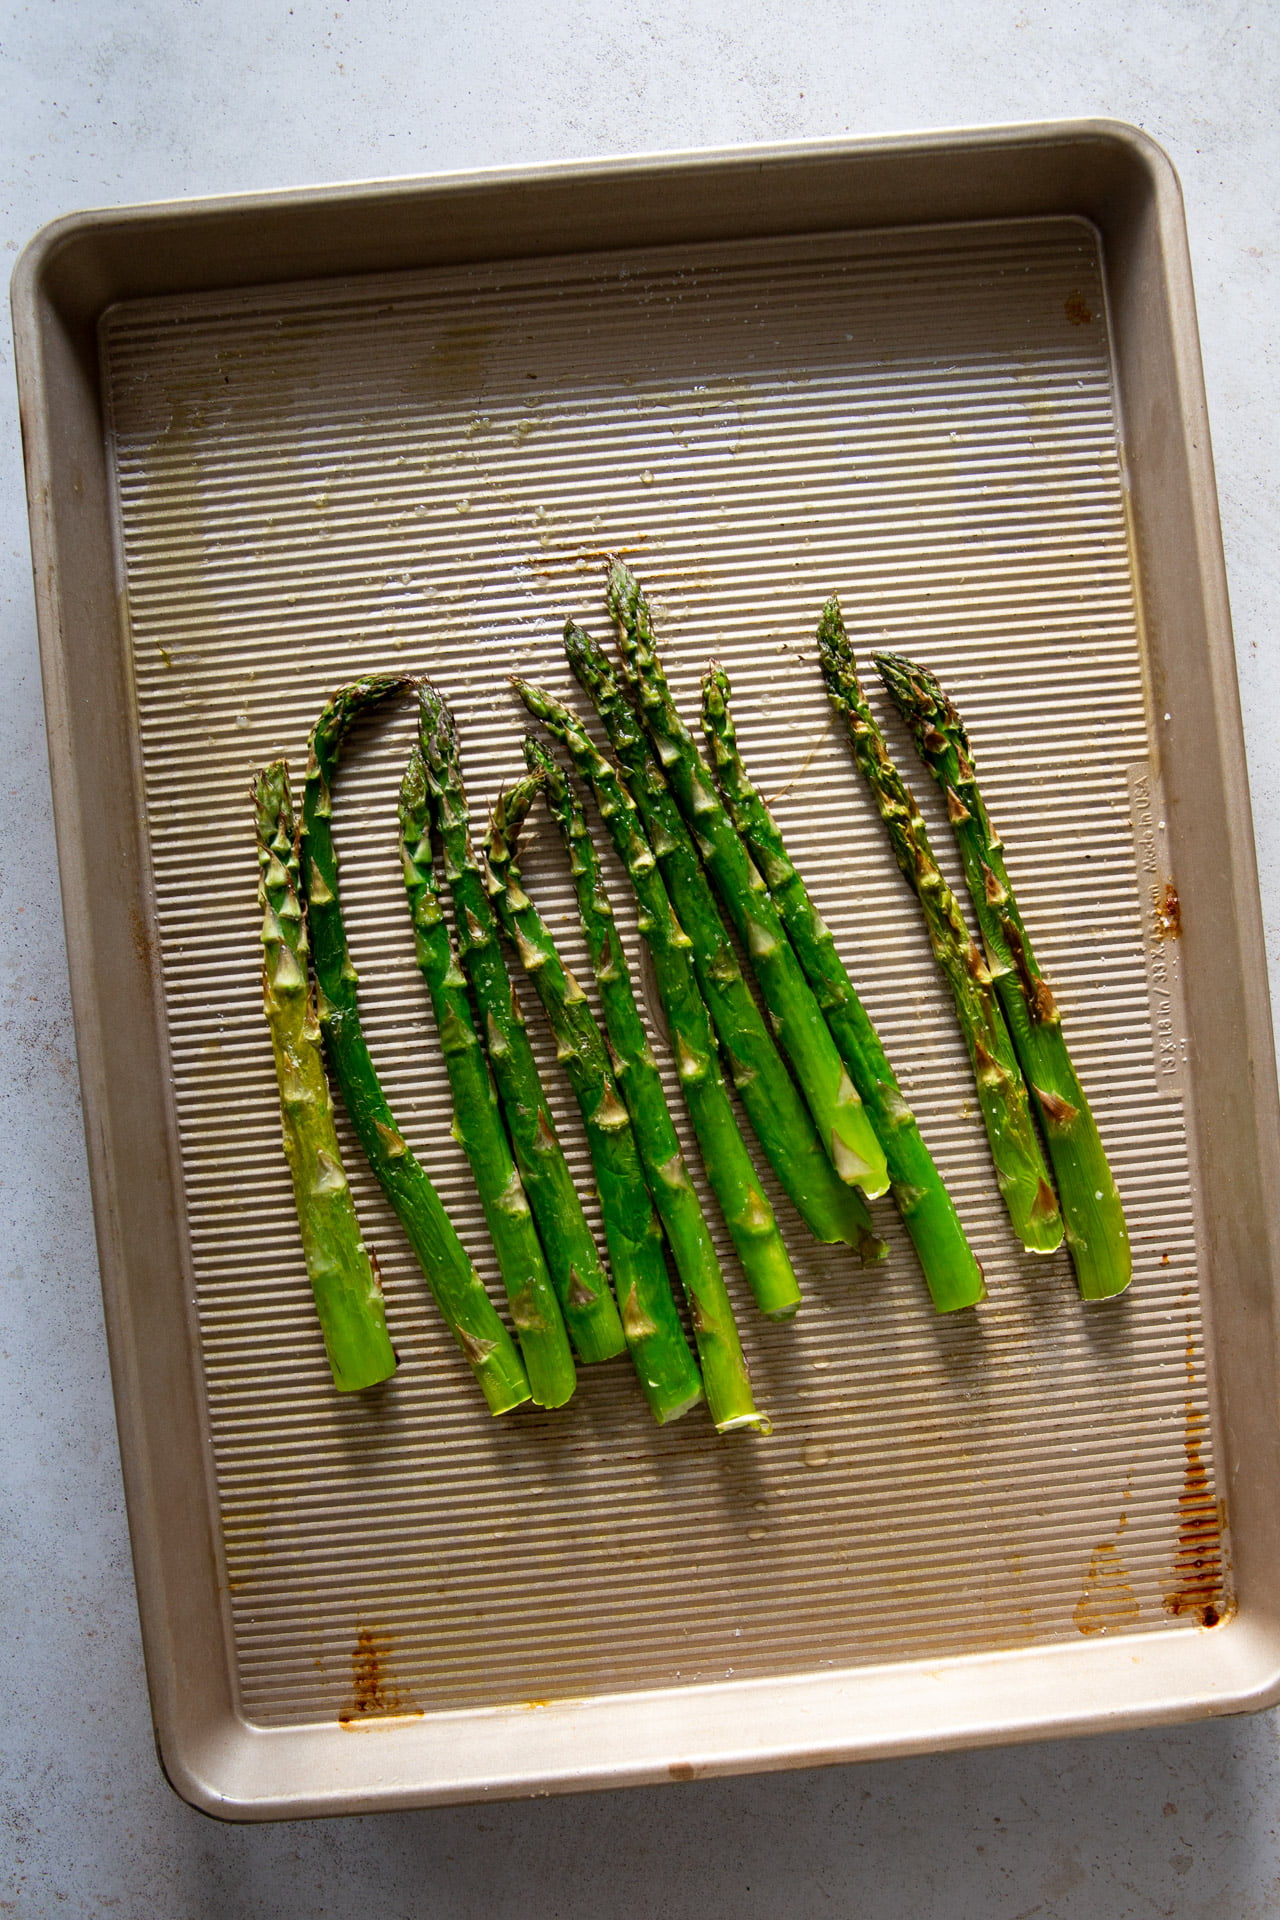 asparagus cooked on top of an air tray.